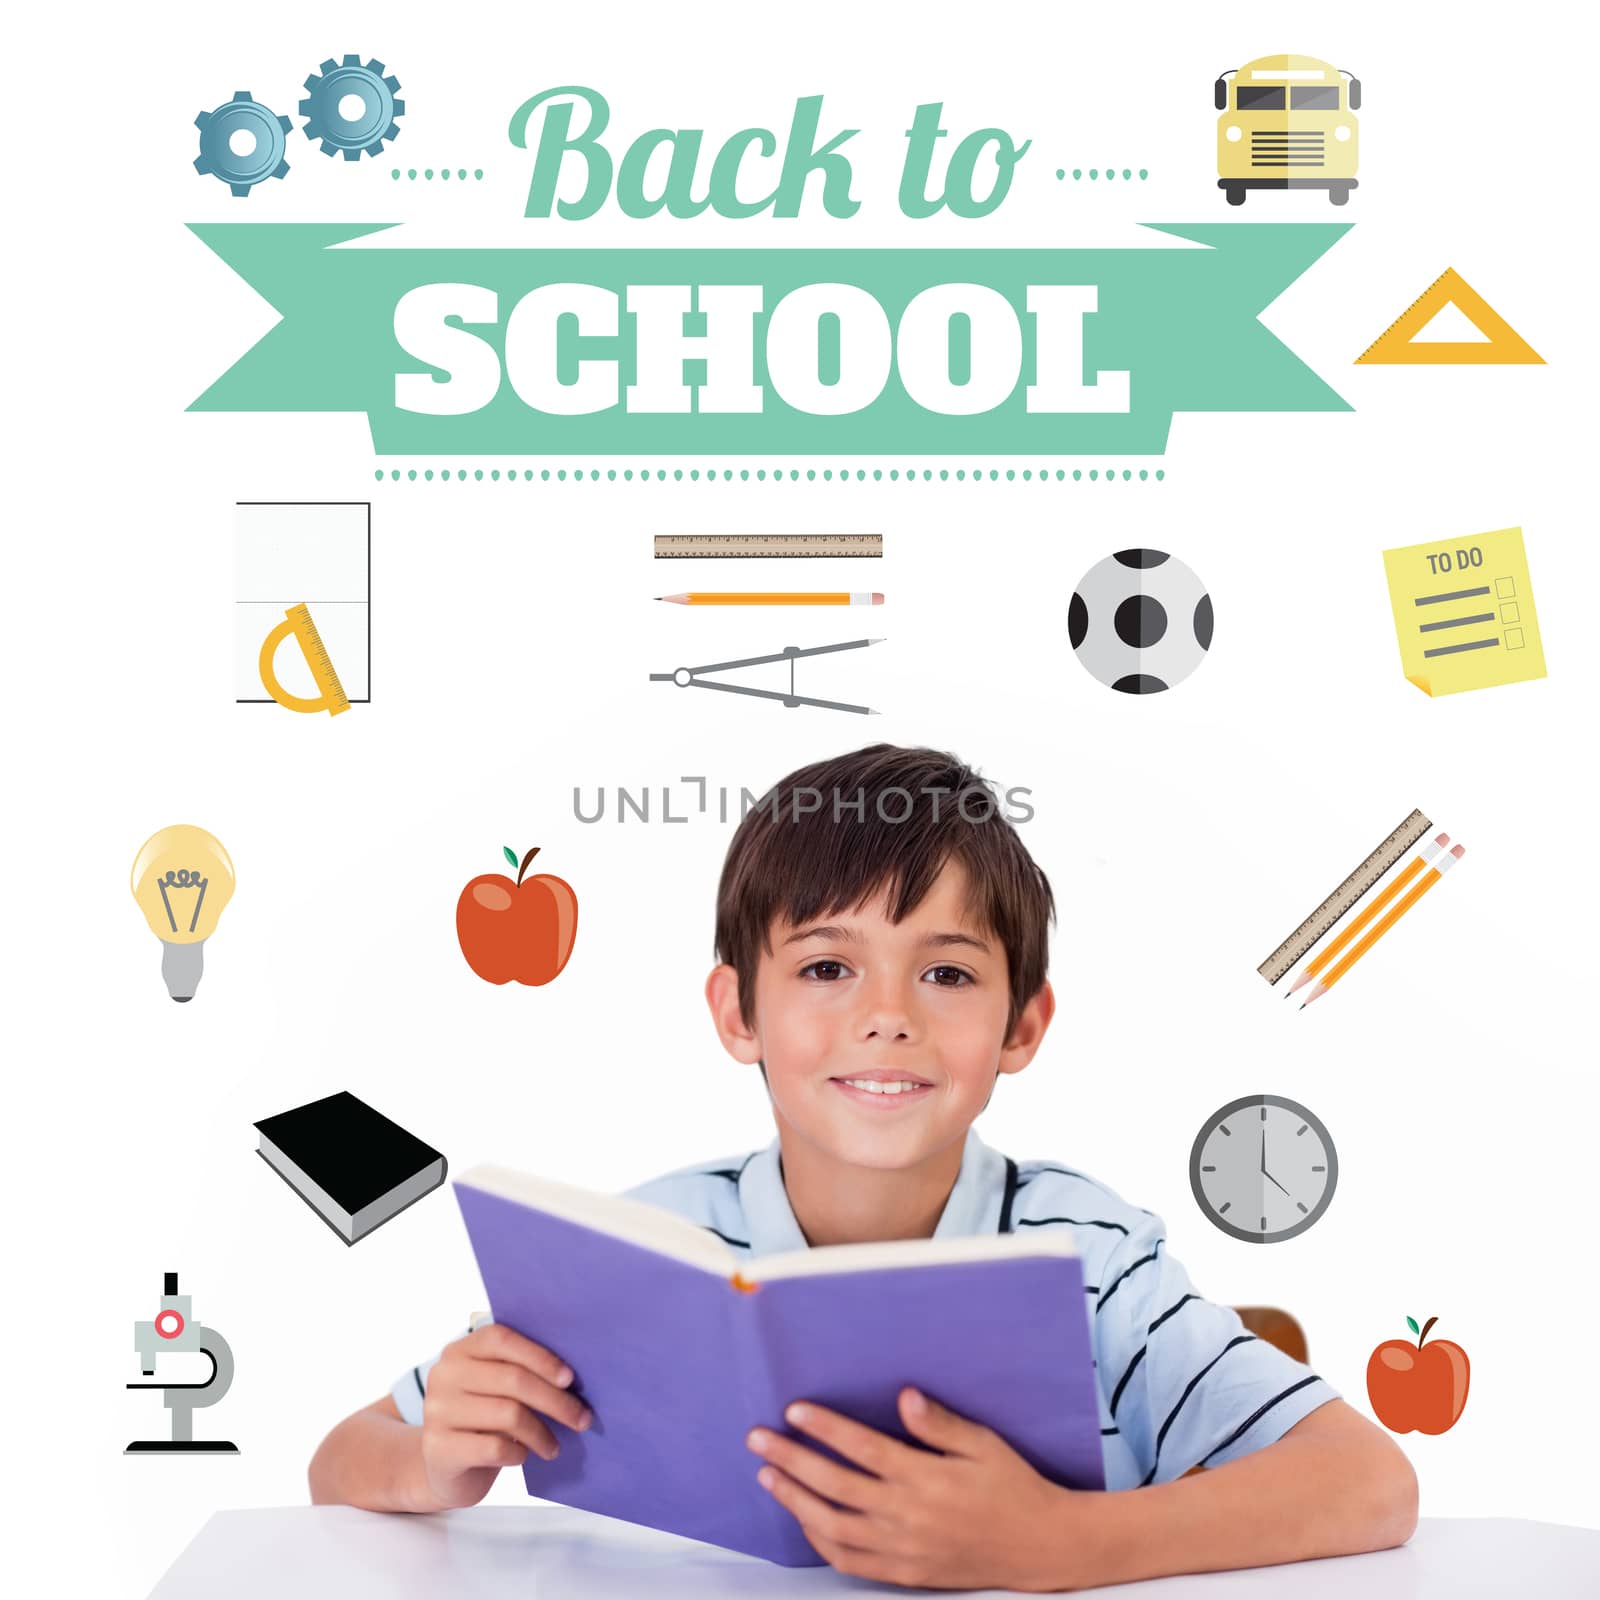 Composite image of back to school message with icons by Wavebreakmedia